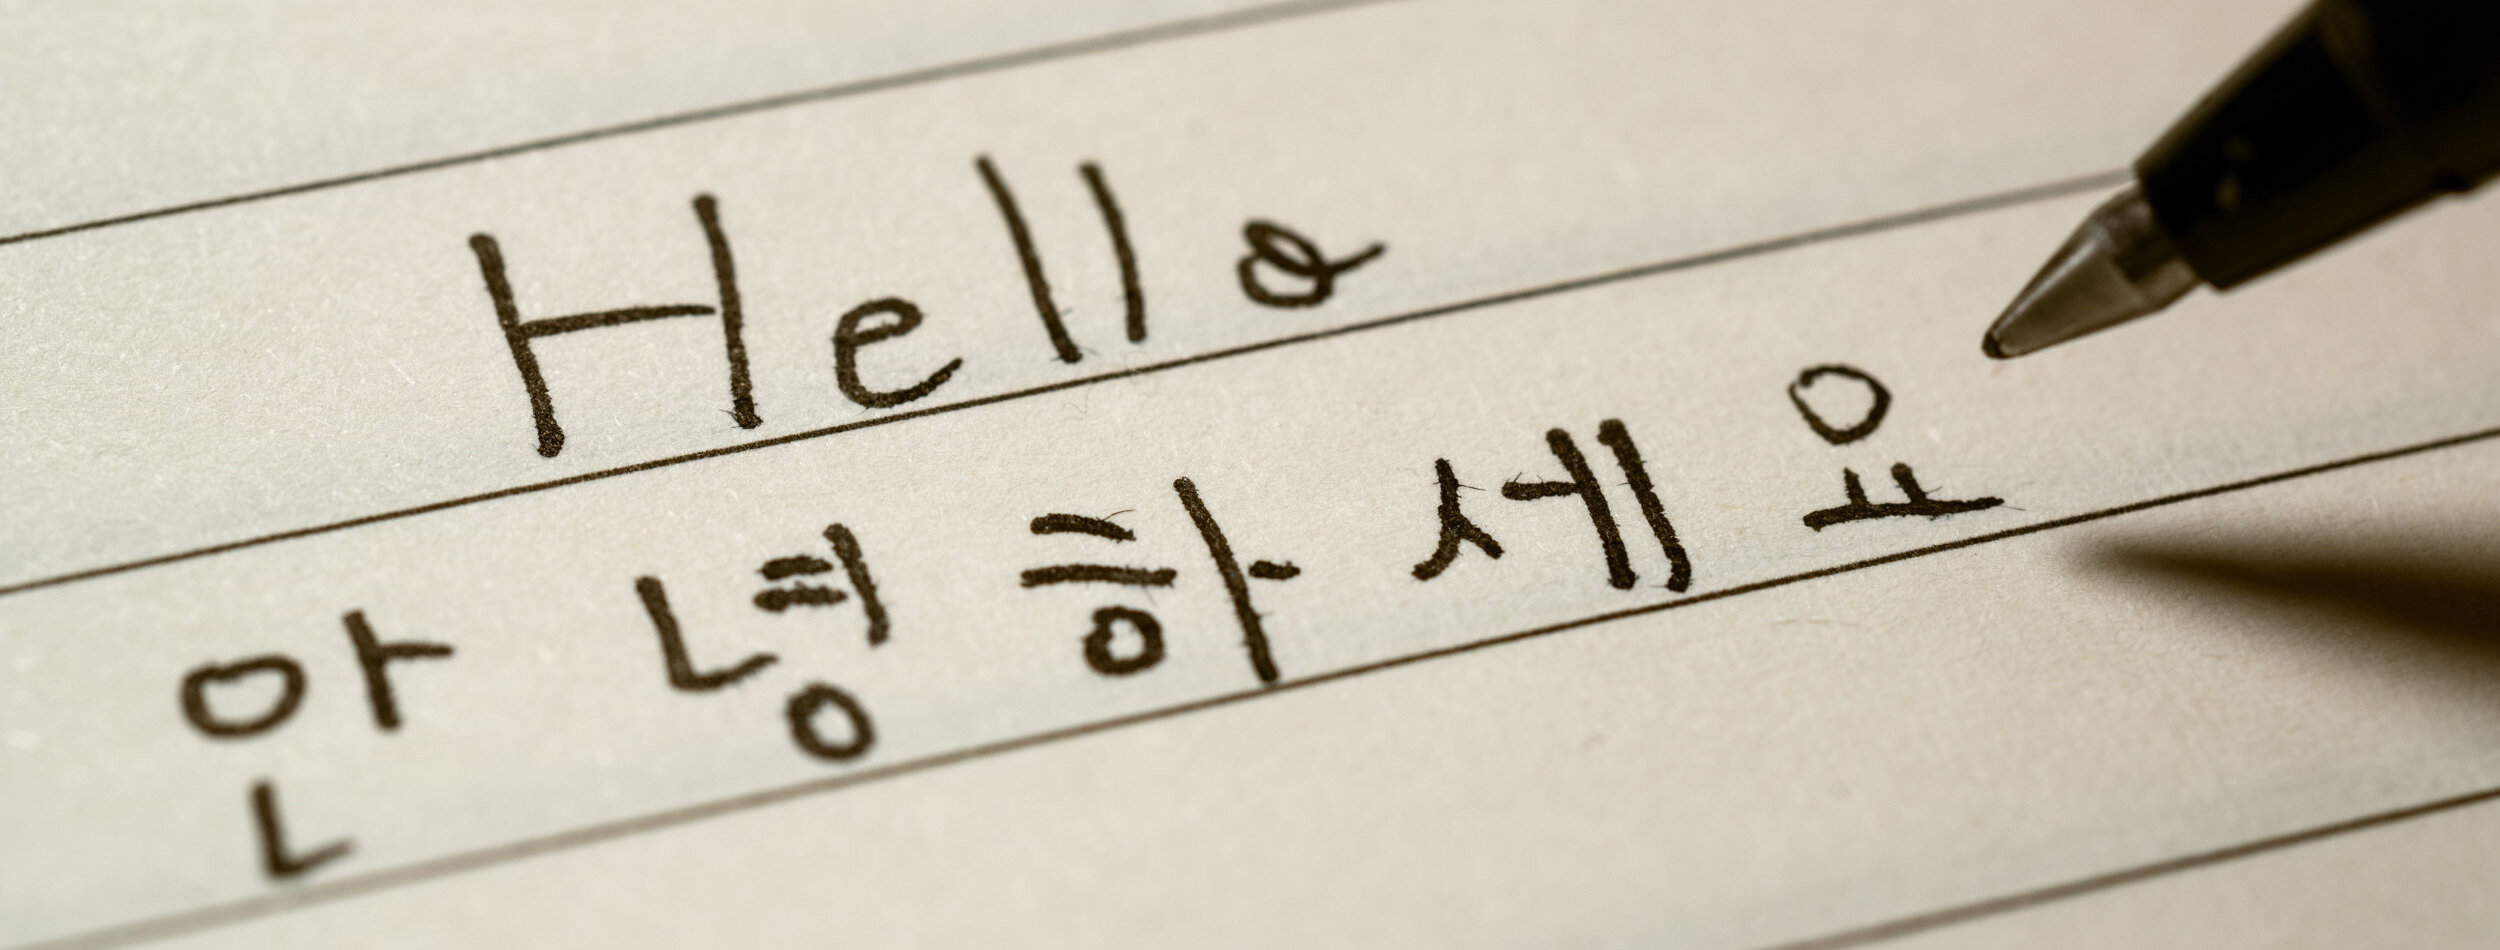 Beginner Korean language learner writing Hello word Annyeonghaseyo in Korean characters on a notebook close-up shot